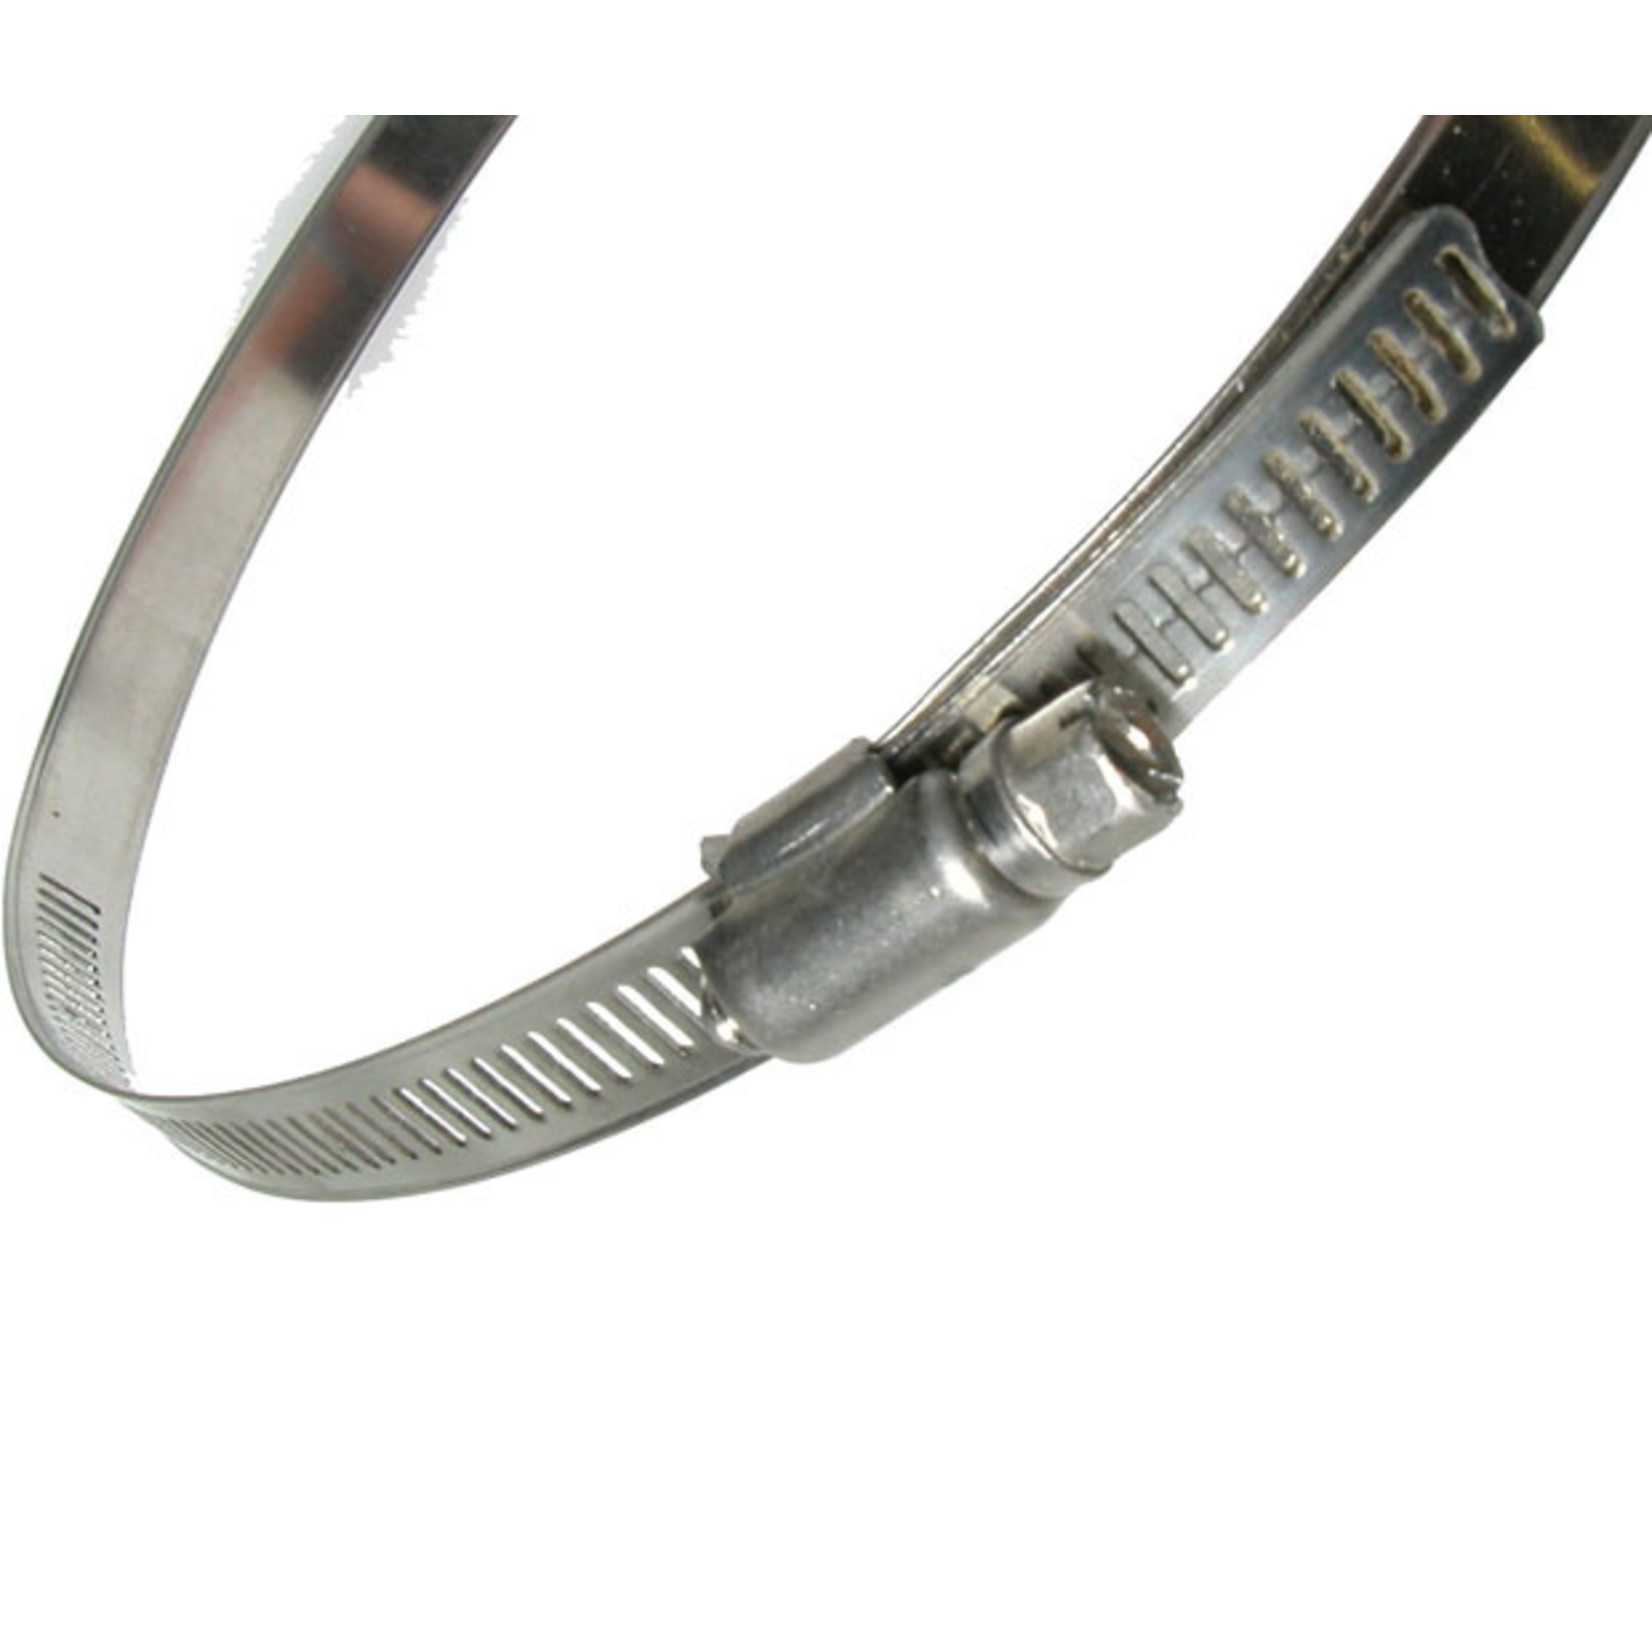 Active Air Stainless Steel Duct Clamps 6"